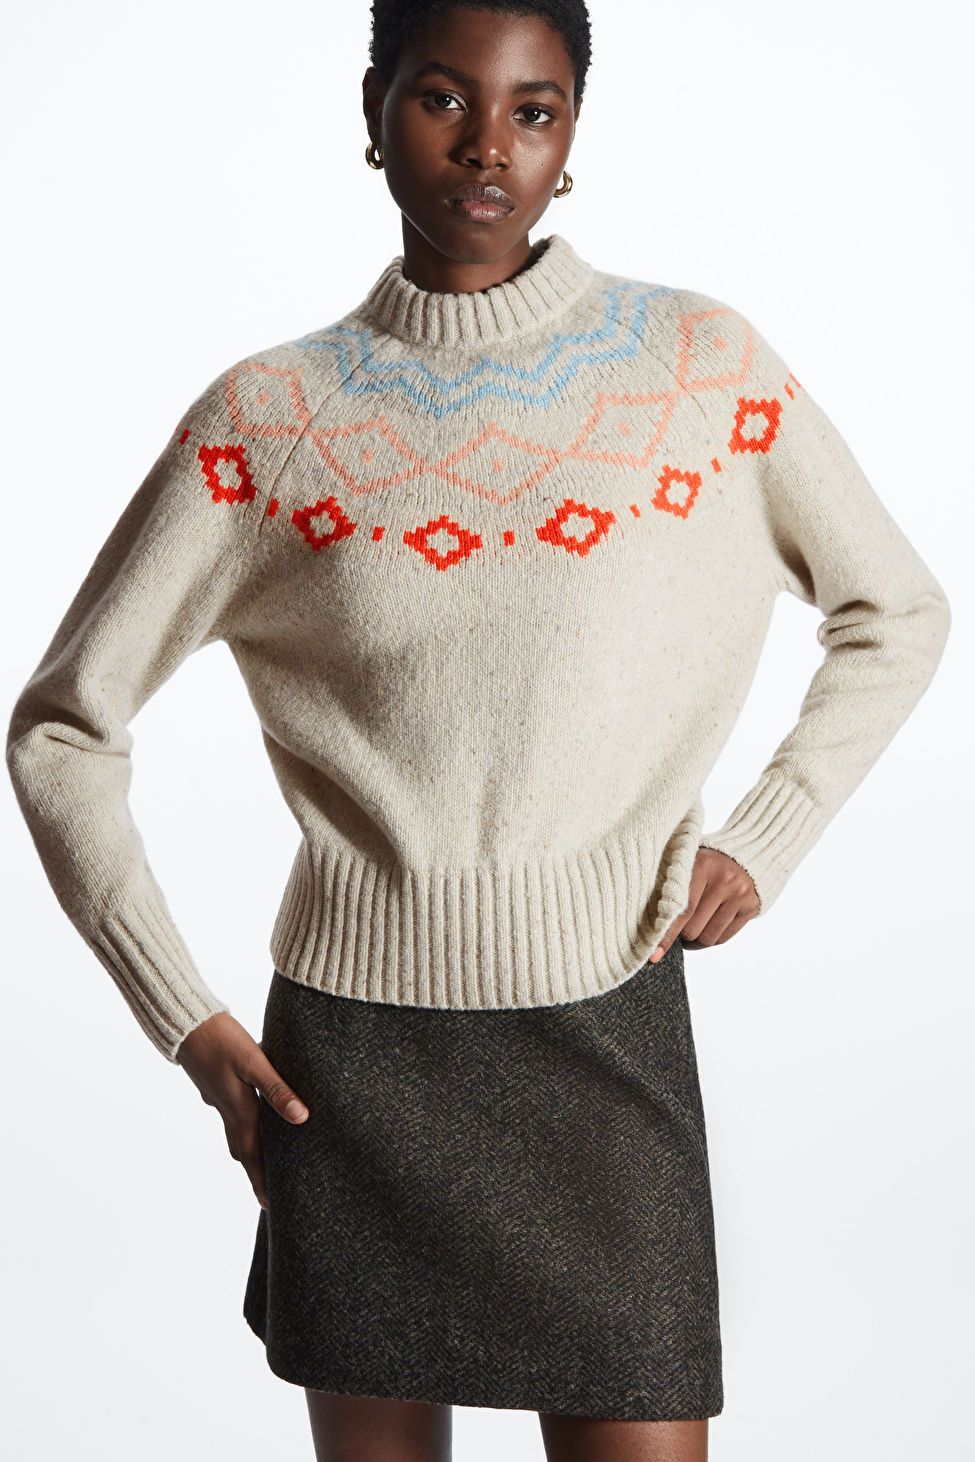 FAIR ISLE MERINO WOOL SWEATER - BEIGE - Jumpers - Christmas Sweater Outfit - Winter Outfit | COS (US)